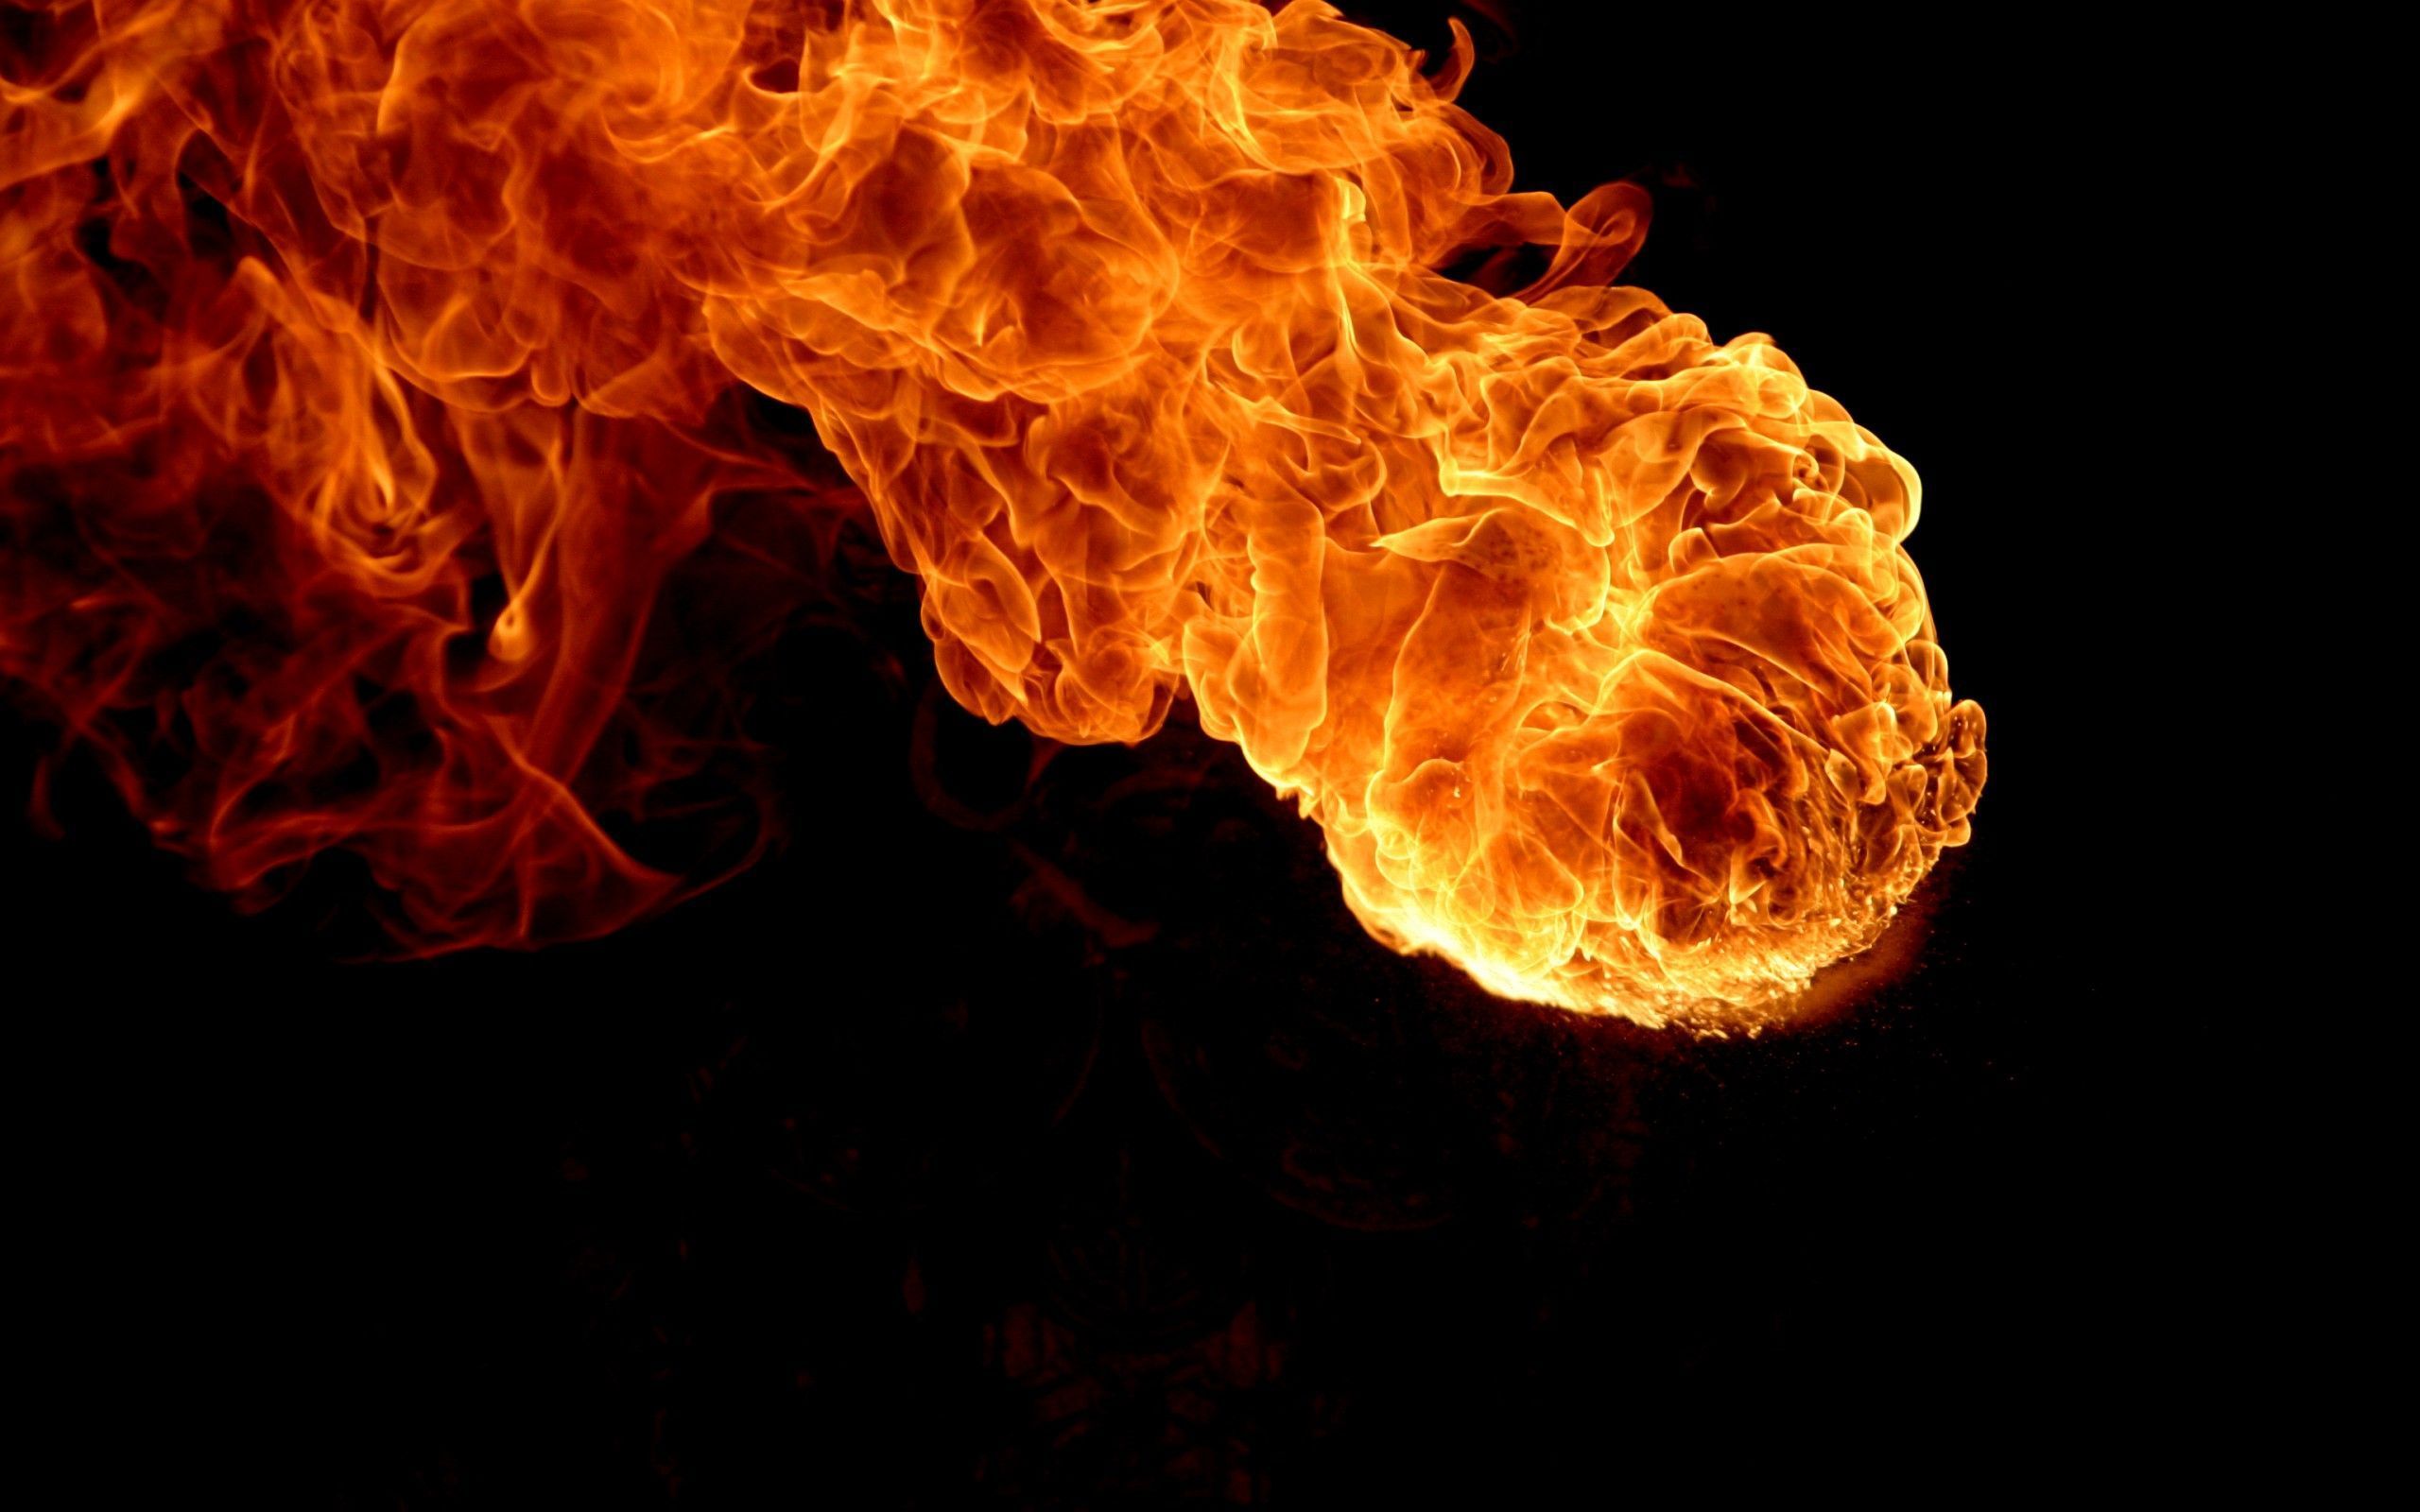 Basketball On Fire Wallpapers on WallpaperDog